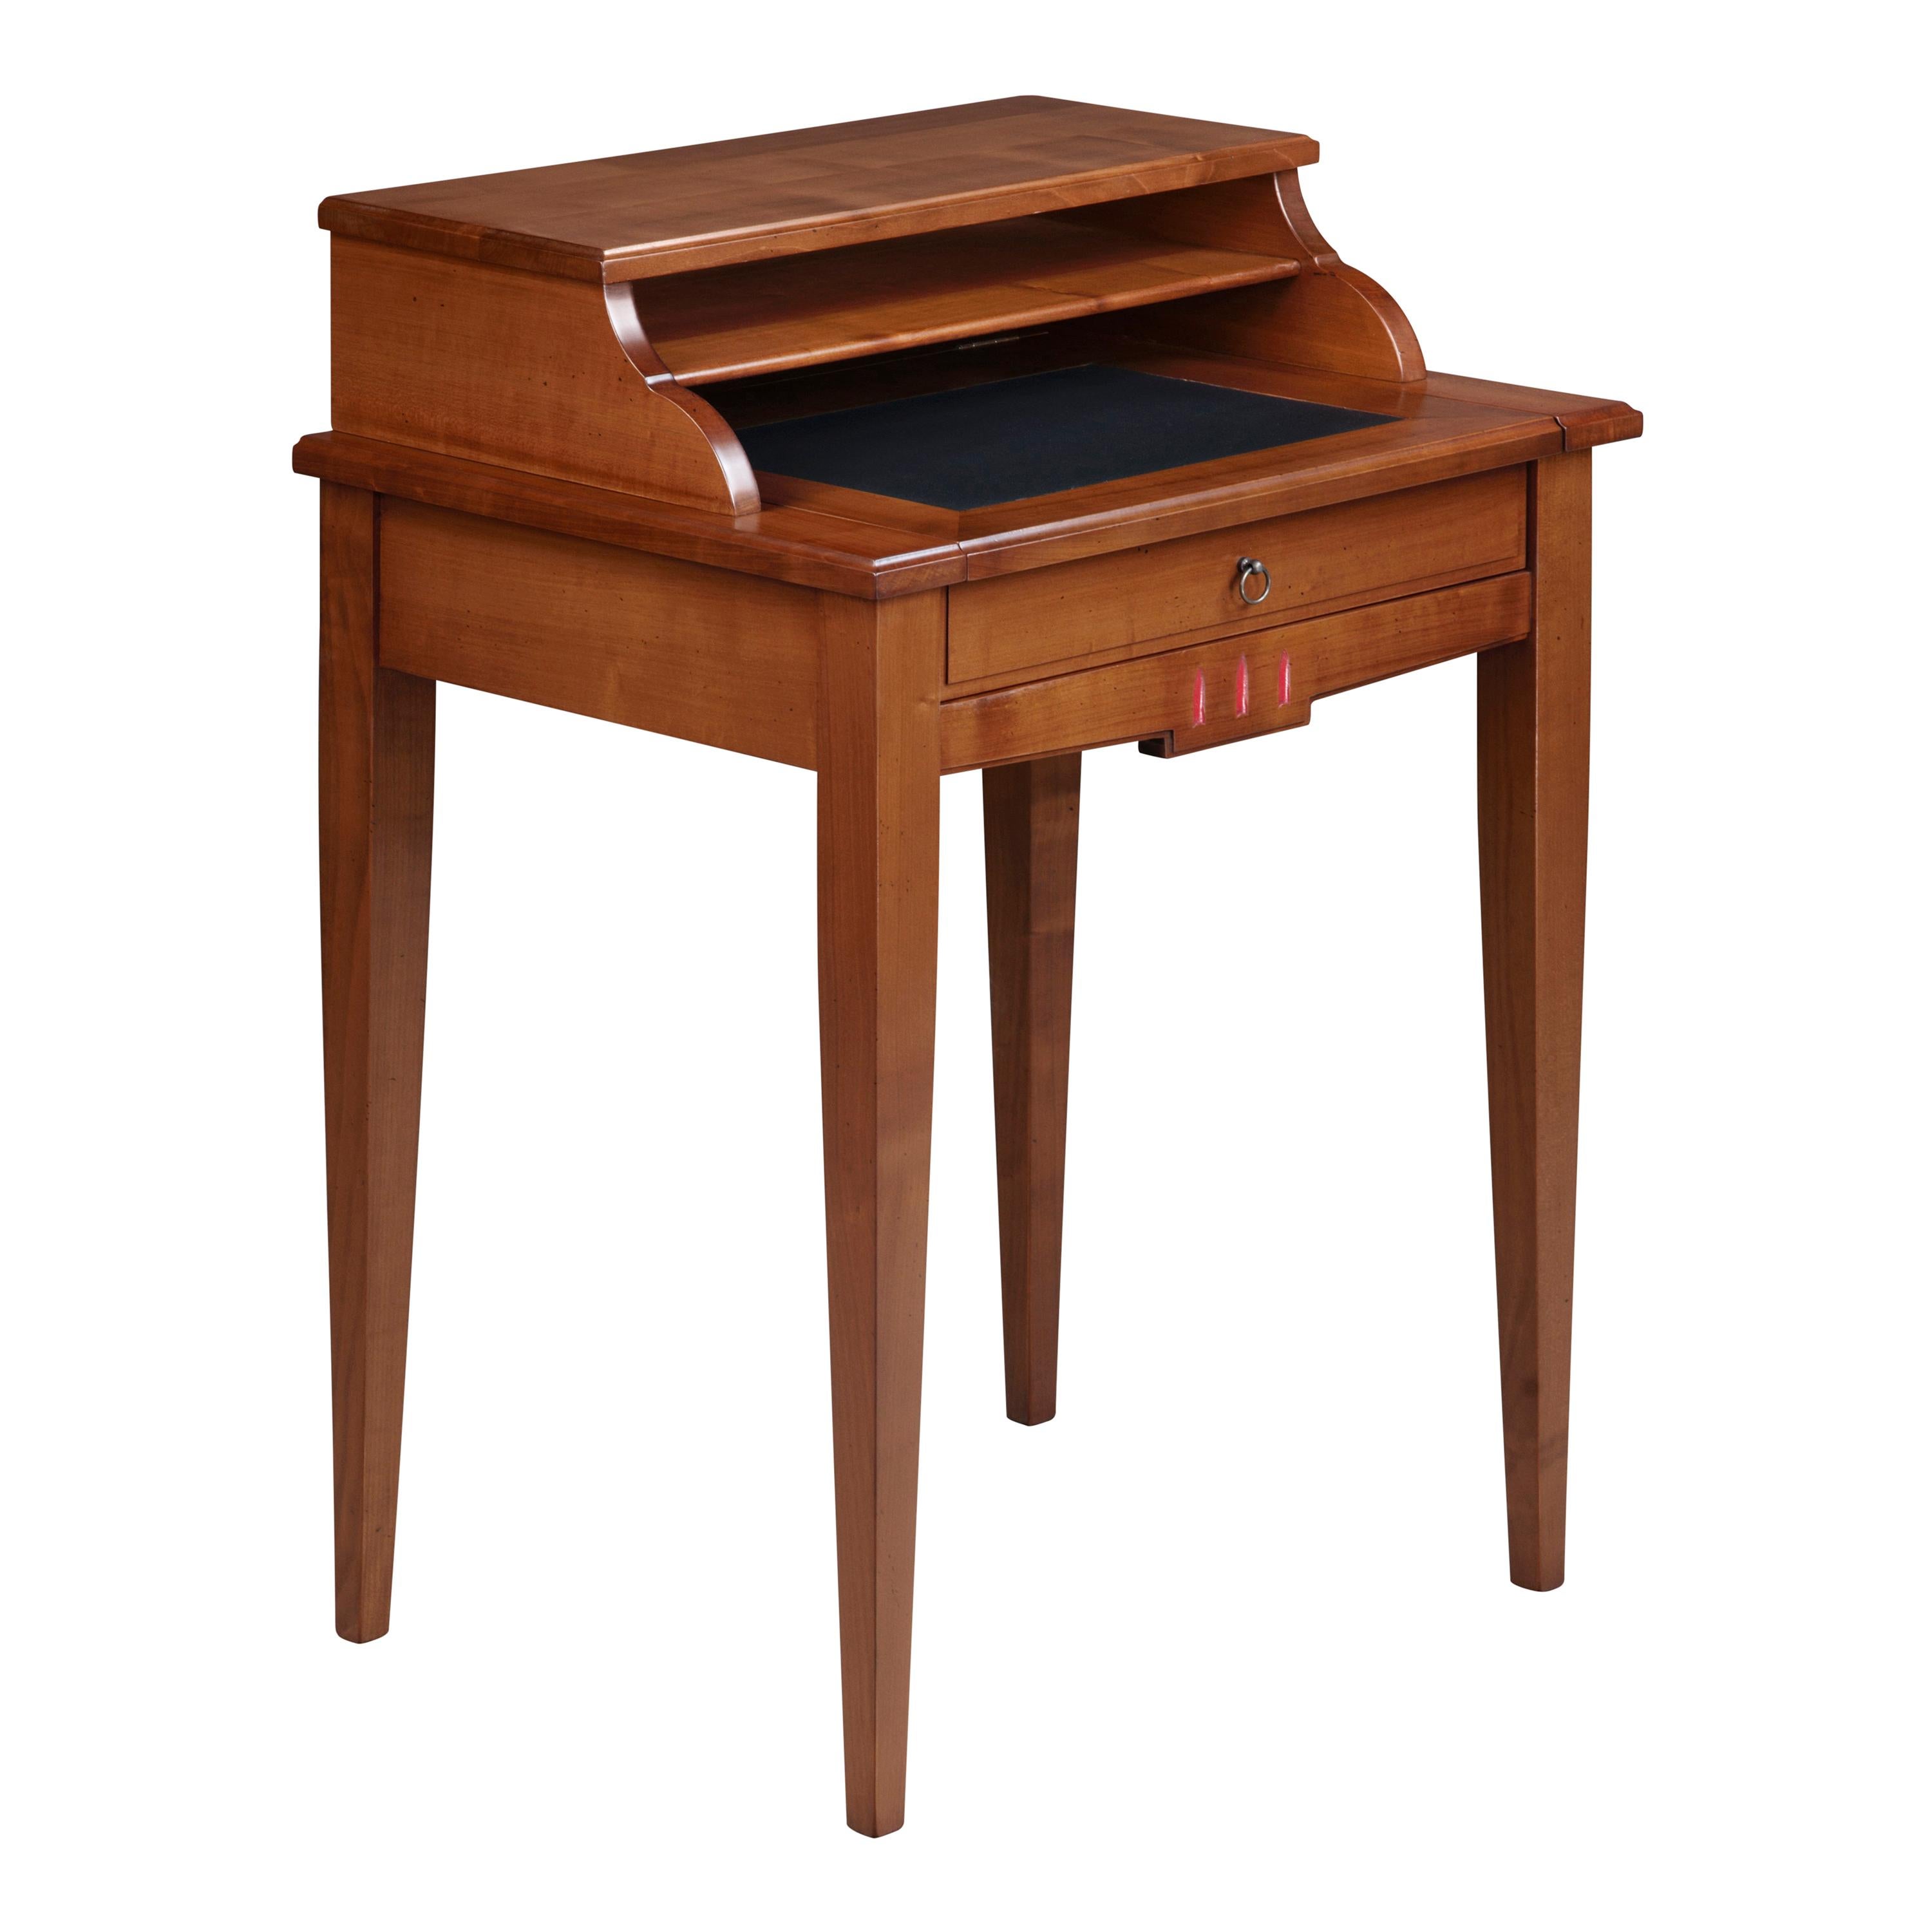 Hand-Crafted Directoire Style Desk Solid Cherry with Leather Pad and Covered Storage Space For Sale